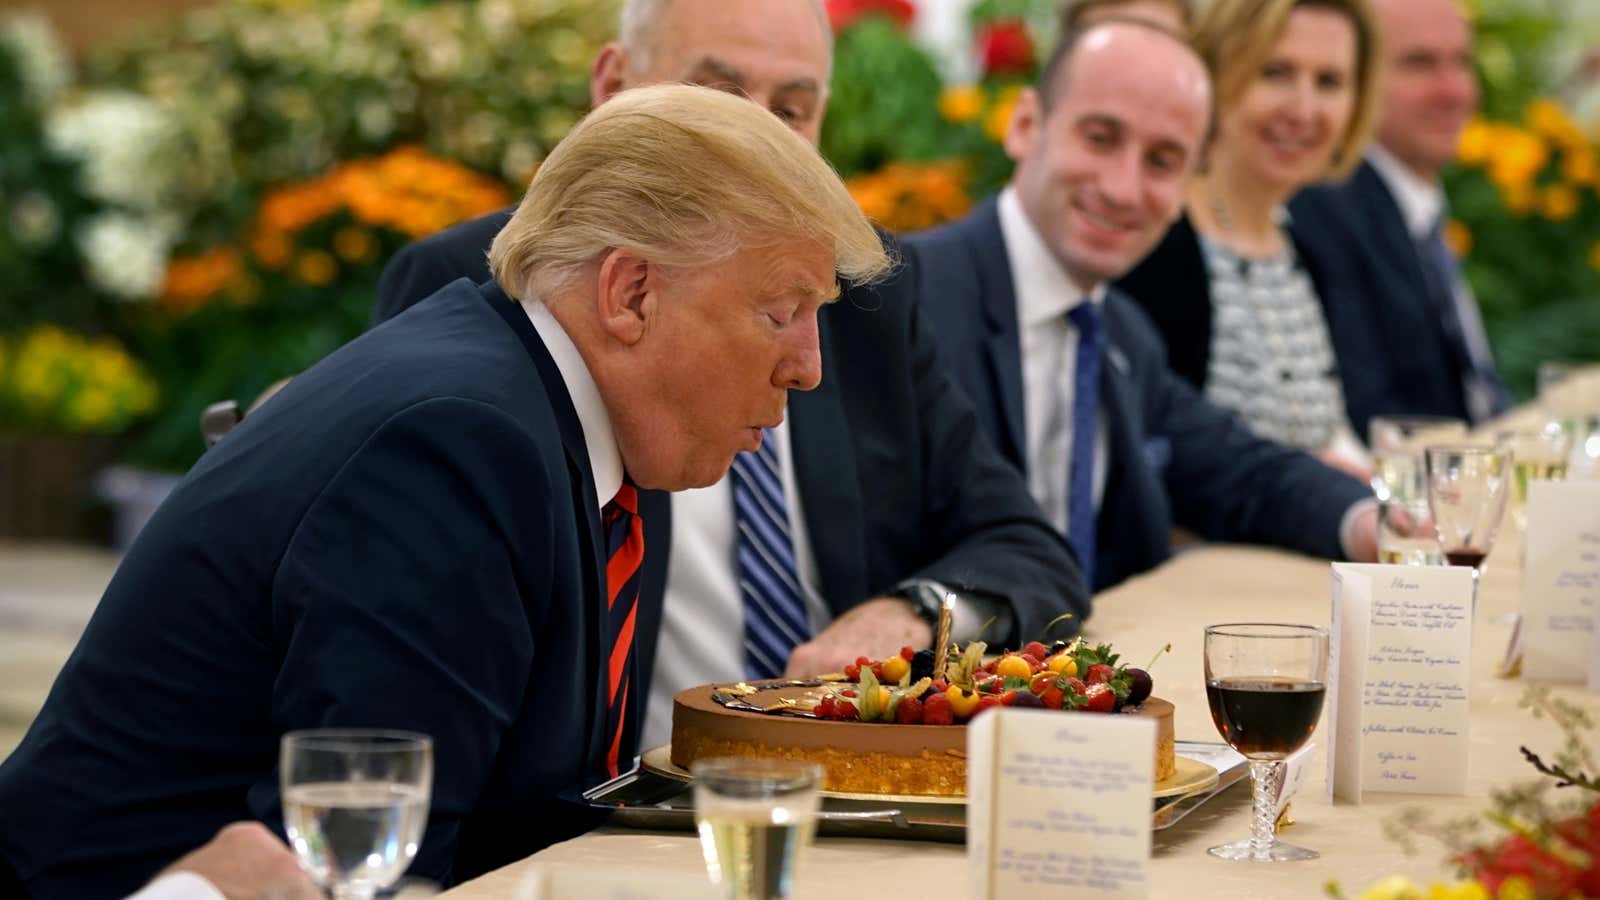 An American president with an eye on food.